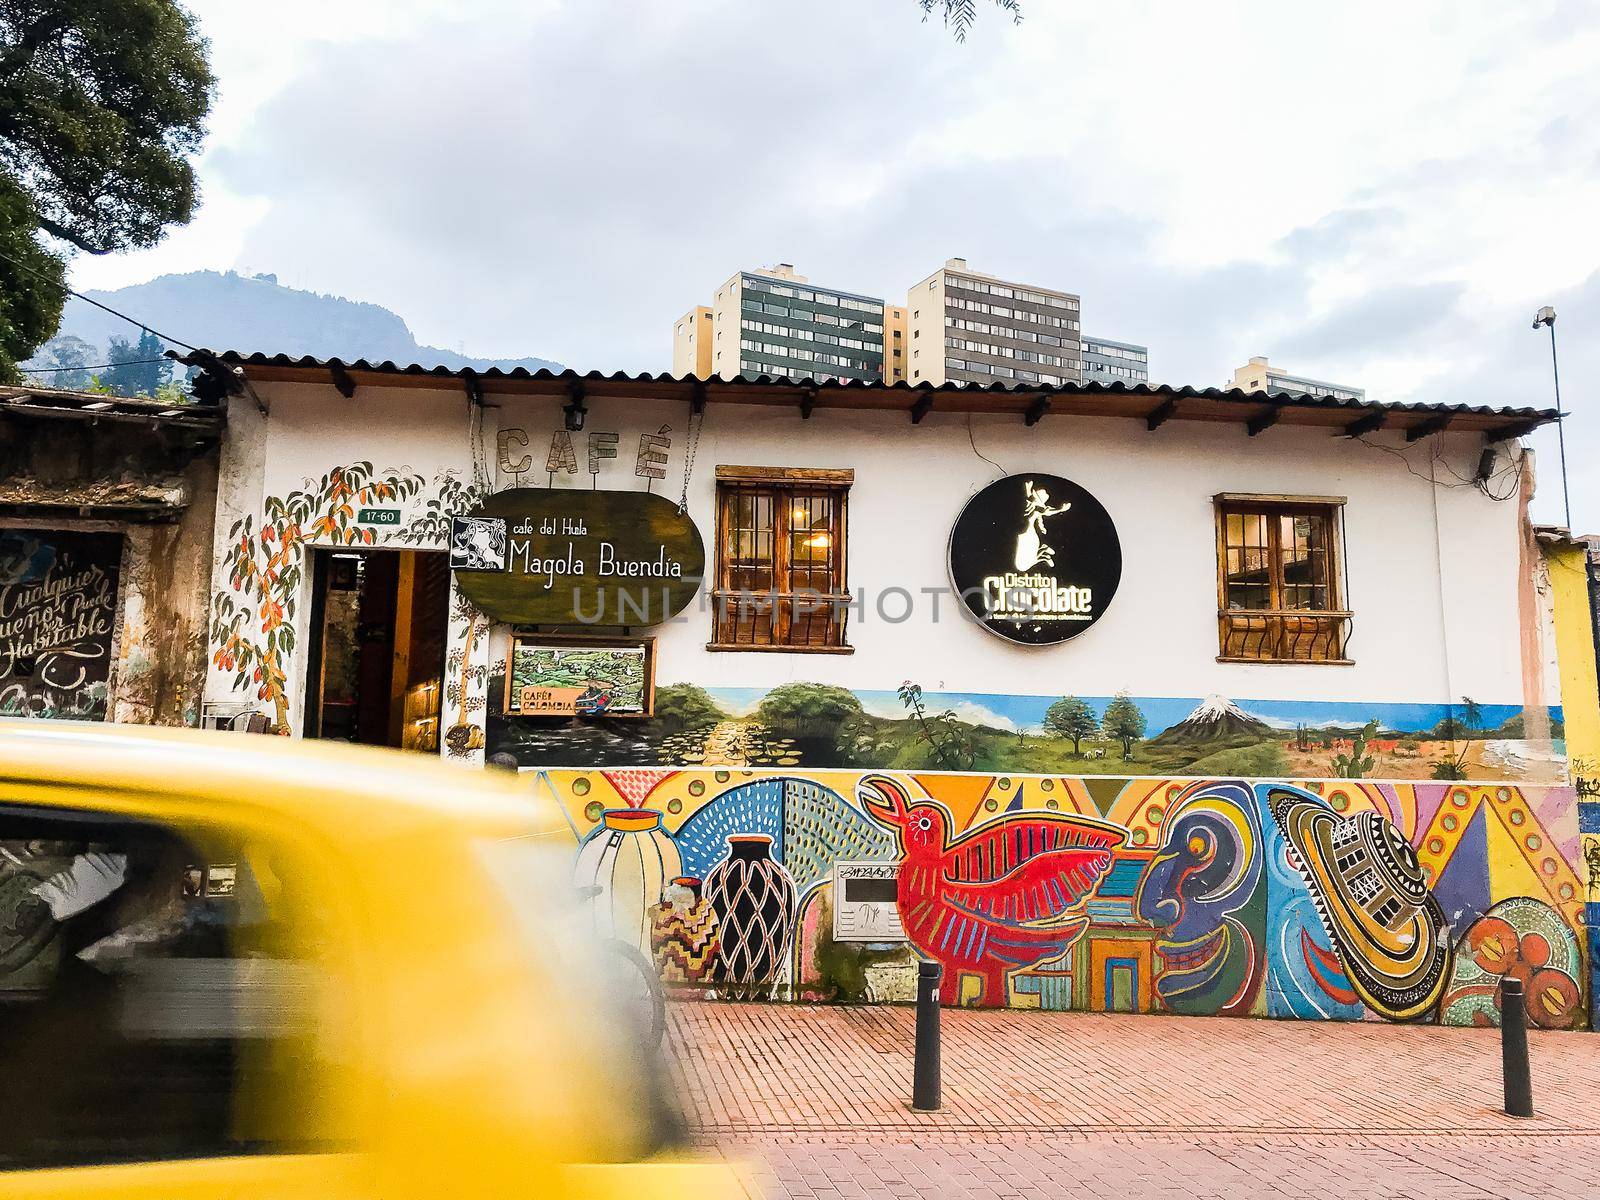 Street view of cafe in Bogota, Colombia with taxi and art mural. by jyurinko